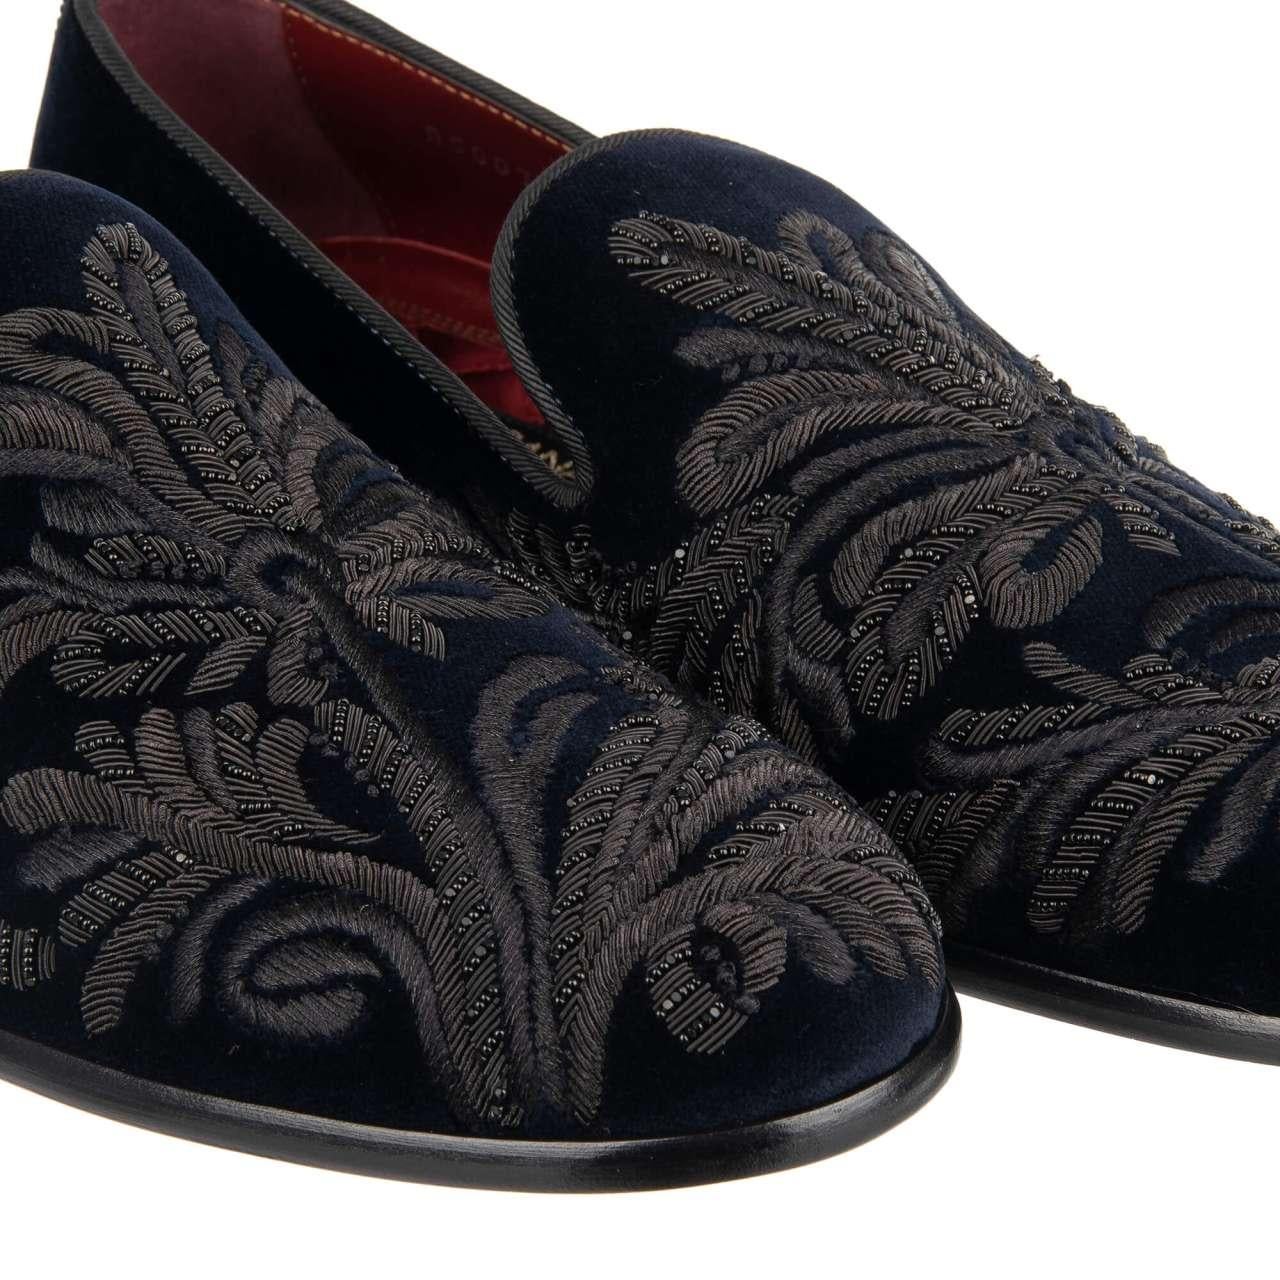 - Velvet loafer shoes MILANO with goldwork floral pattern hand made embroidery in black and blue by DOLCE & GABBANA - MADE IN ITALY - New with Box - Model: A50073-AE850-80652 - Material: 100% Cotton - Sole: Leather - Color: Black / Blue - Pearl and